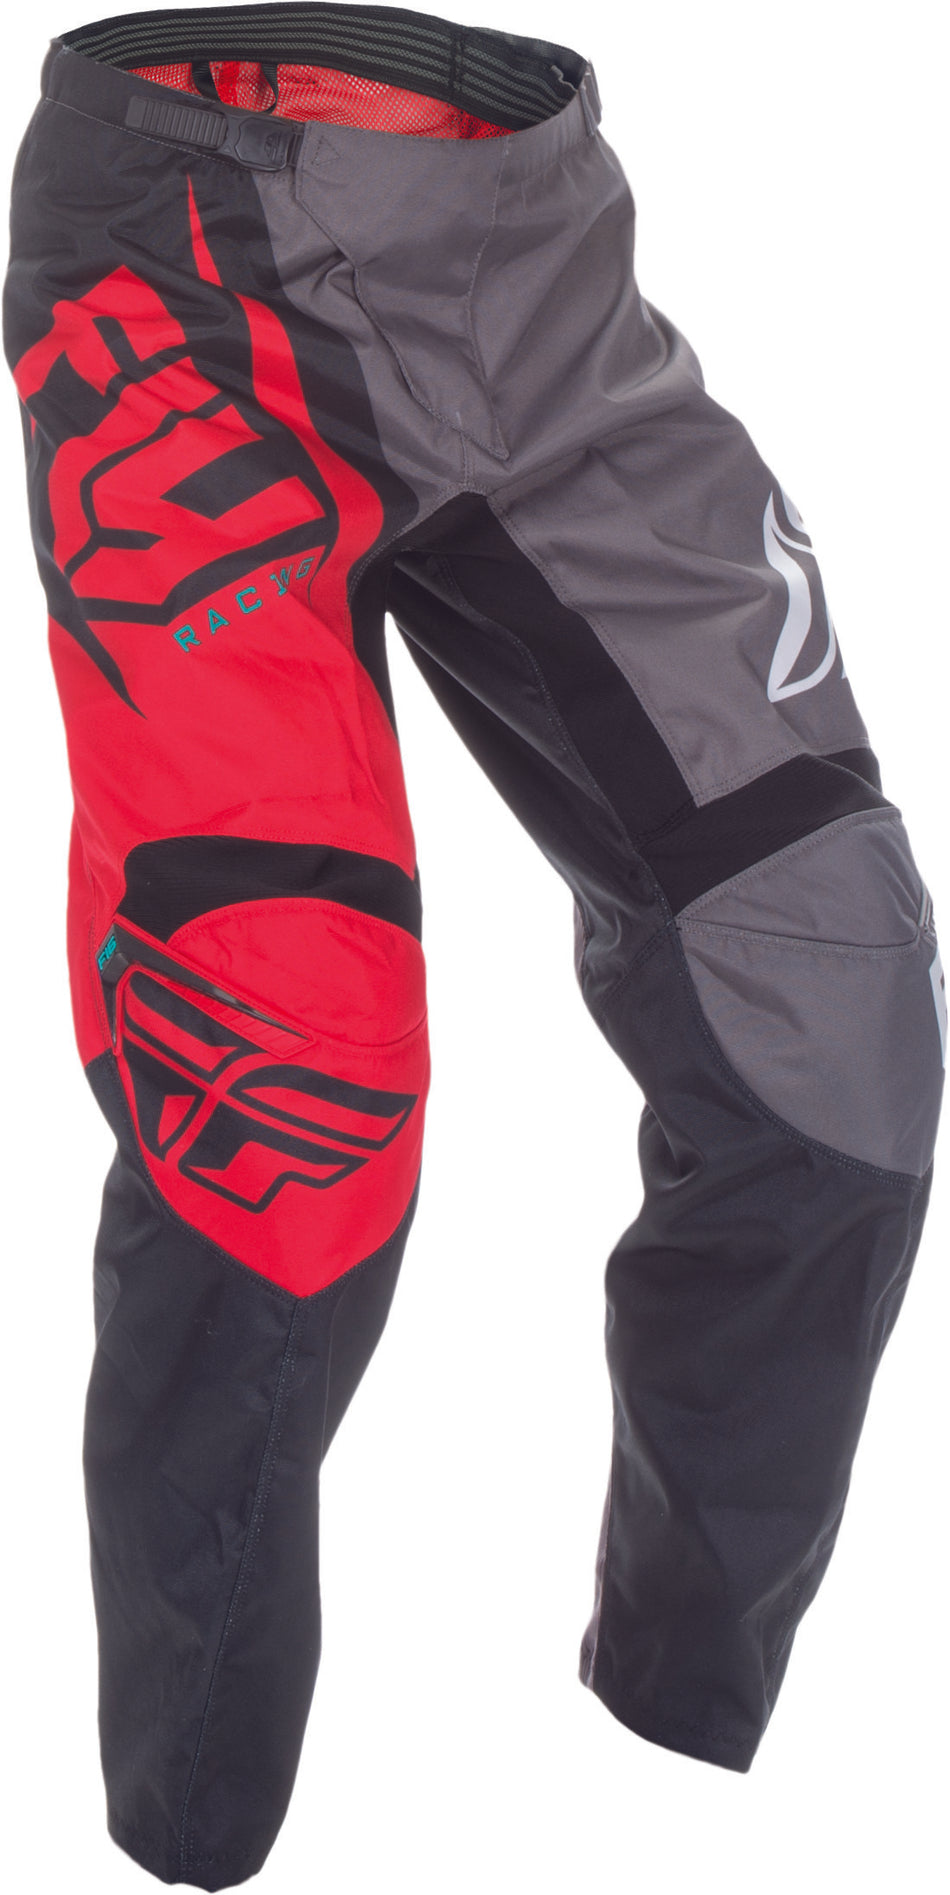 FLY RACING F-16 Pant Red/Black/Grey Sz 30 370-93230